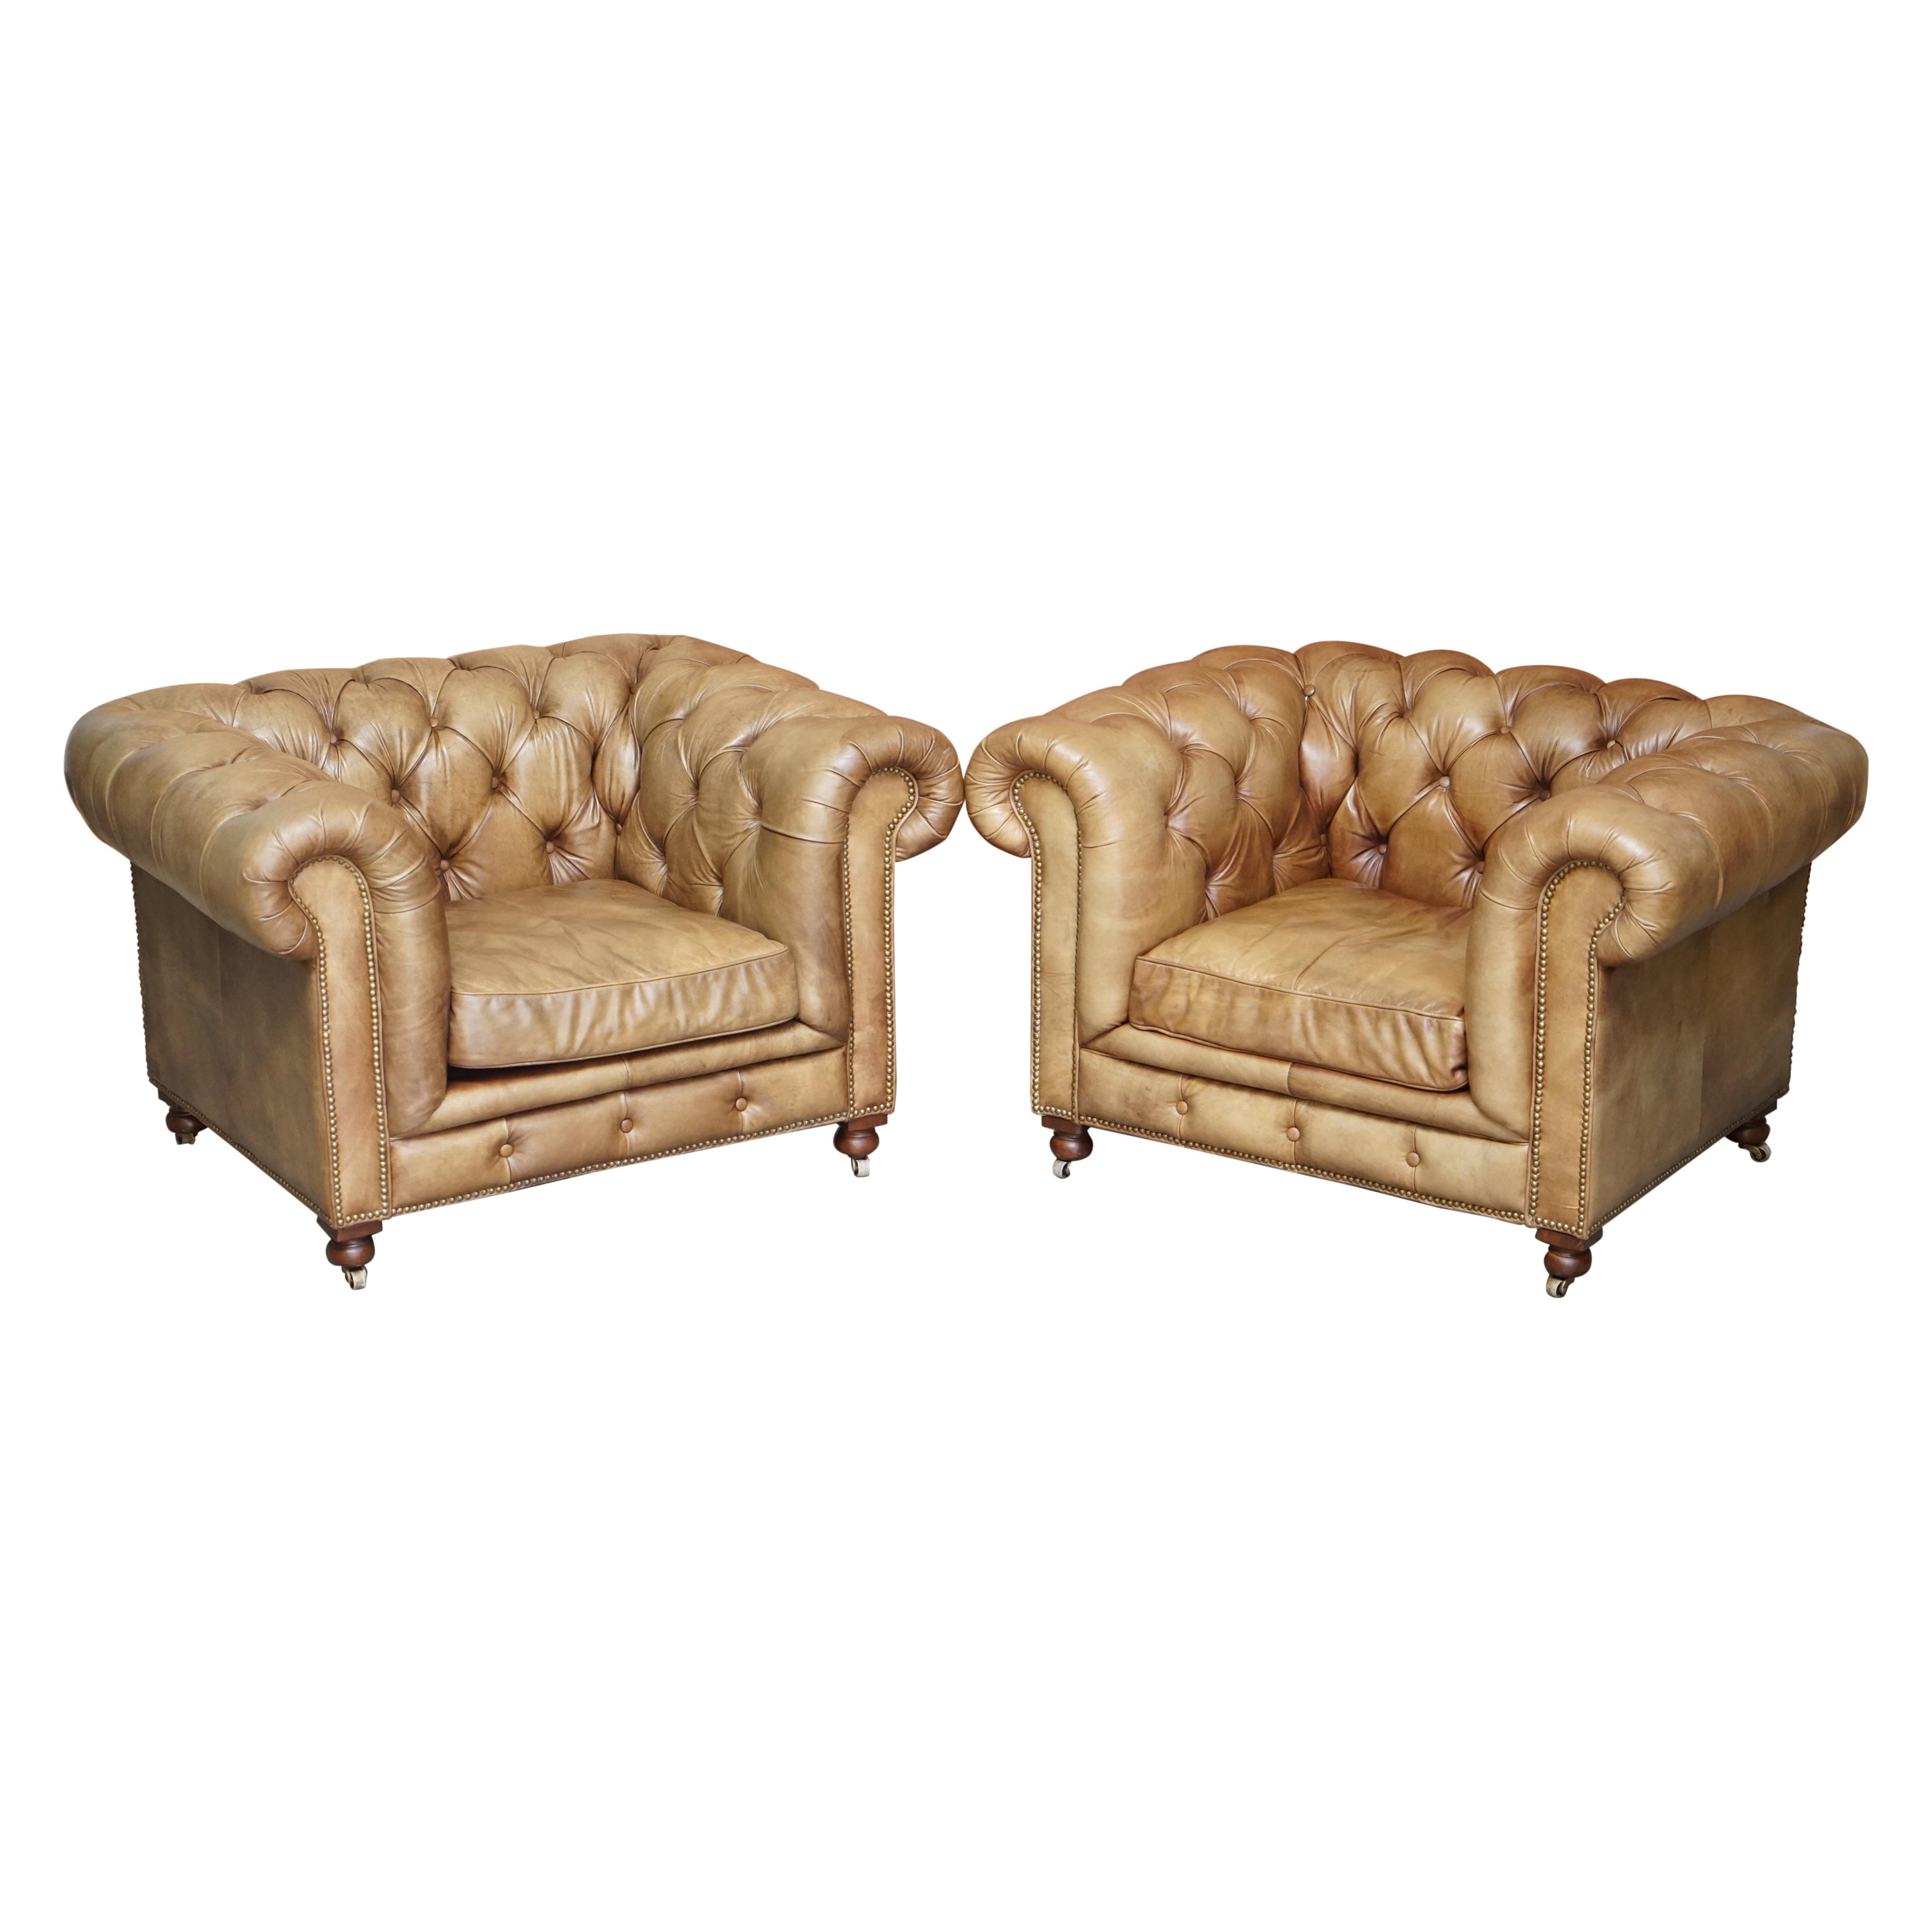 Pair of Vintage Tan Brown Leather Halo Asquith Oversized Chesterfield Armchairs